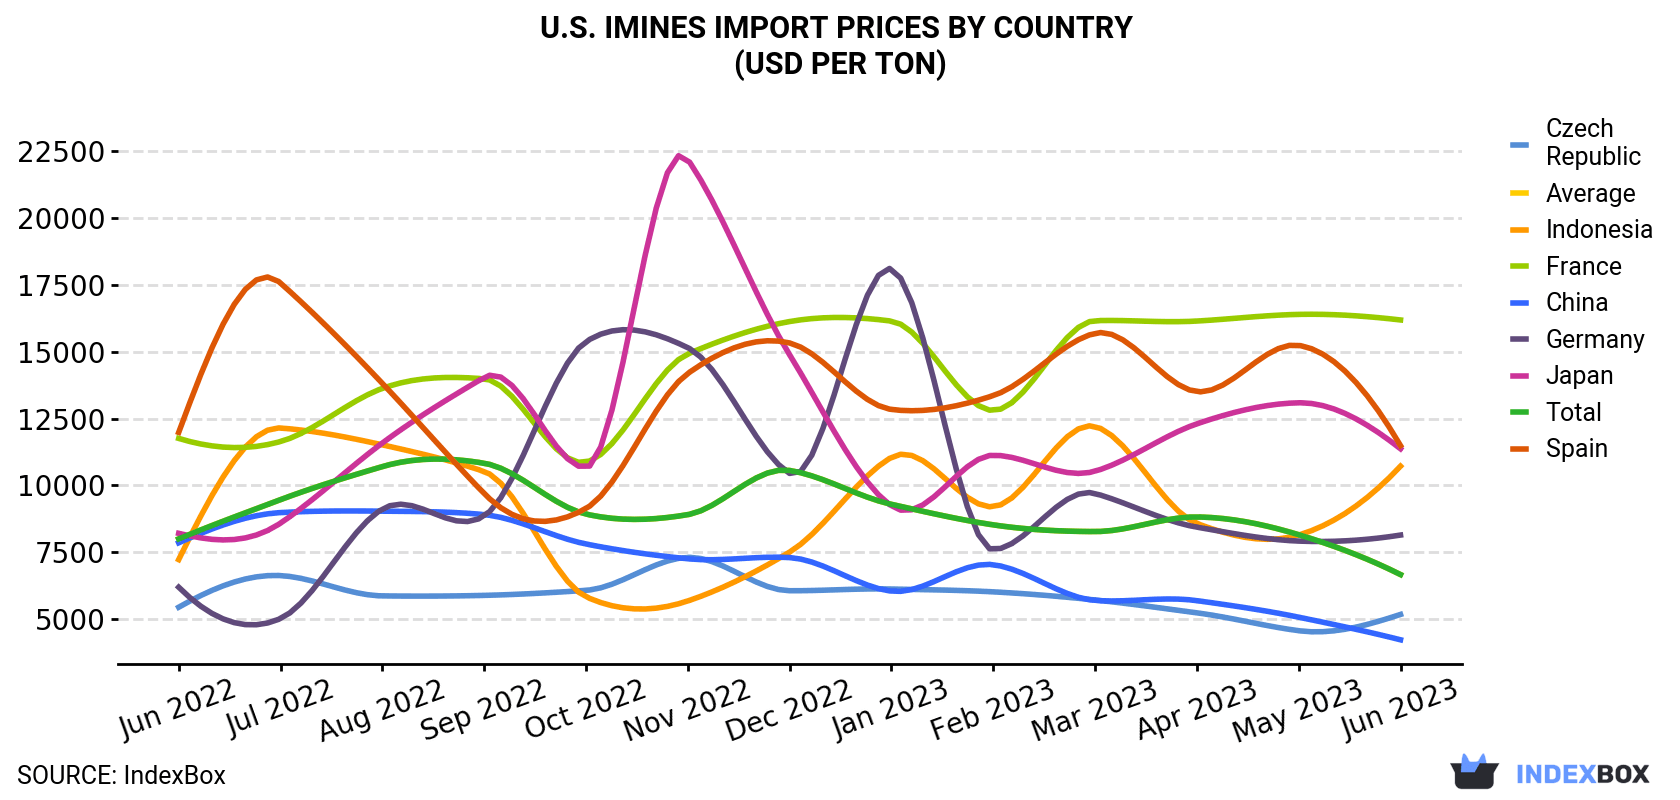 U.S. Imines Import Prices By Country (USD Per Ton)